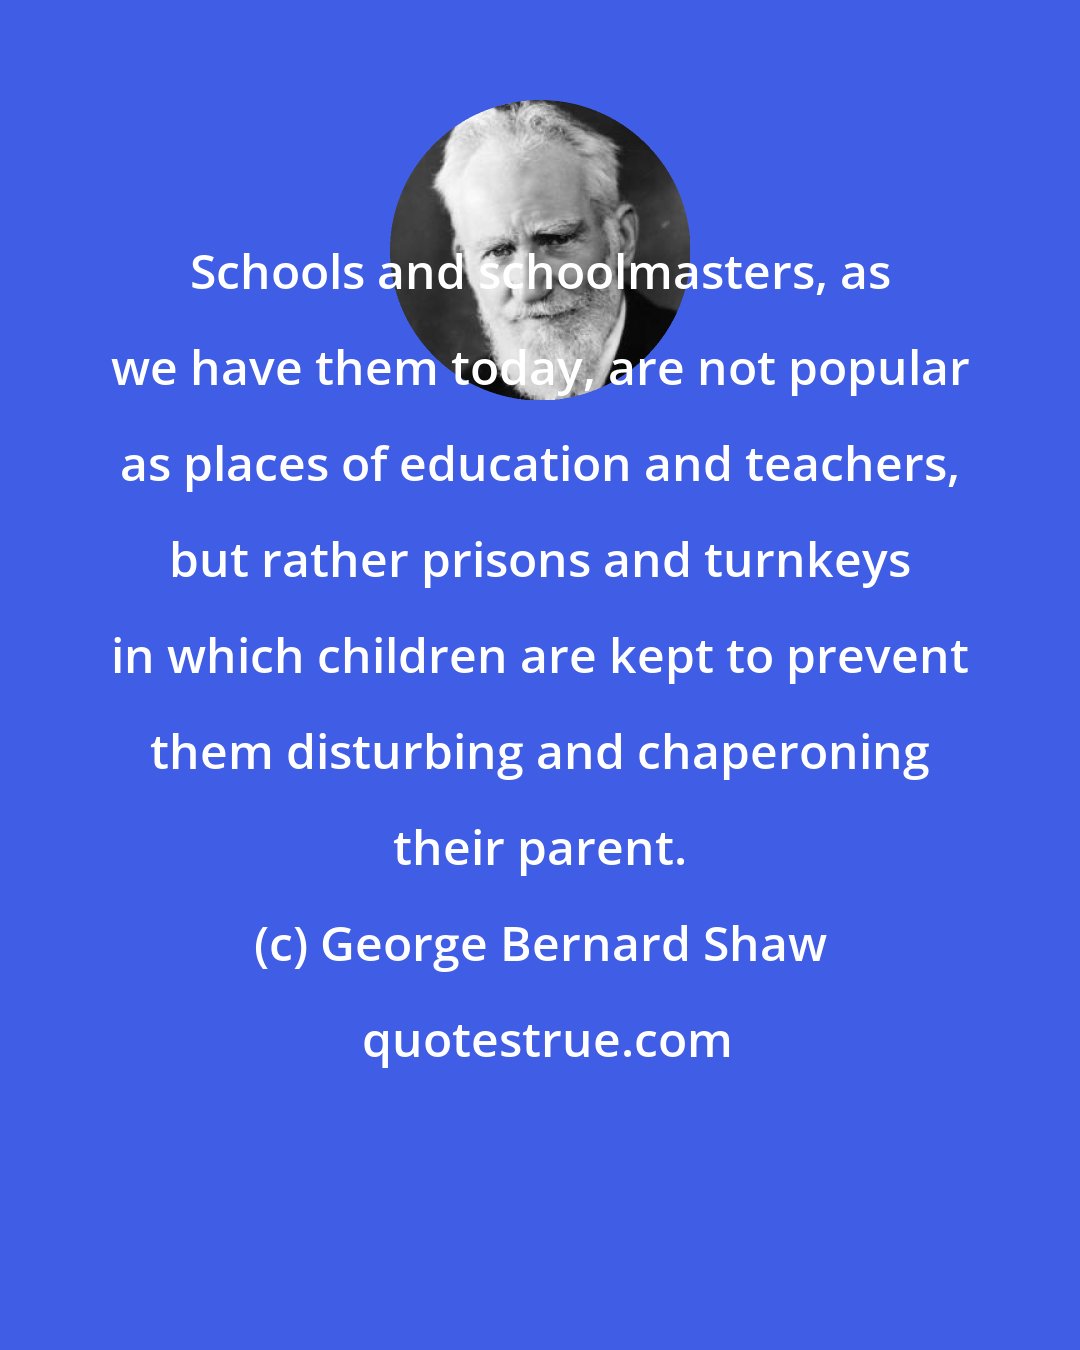 George Bernard Shaw: Schools and schoolmasters, as we have them today, are not popular as places of education and teachers, but rather prisons and turnkeys in which children are kept to prevent them disturbing and chaperoning their parent.